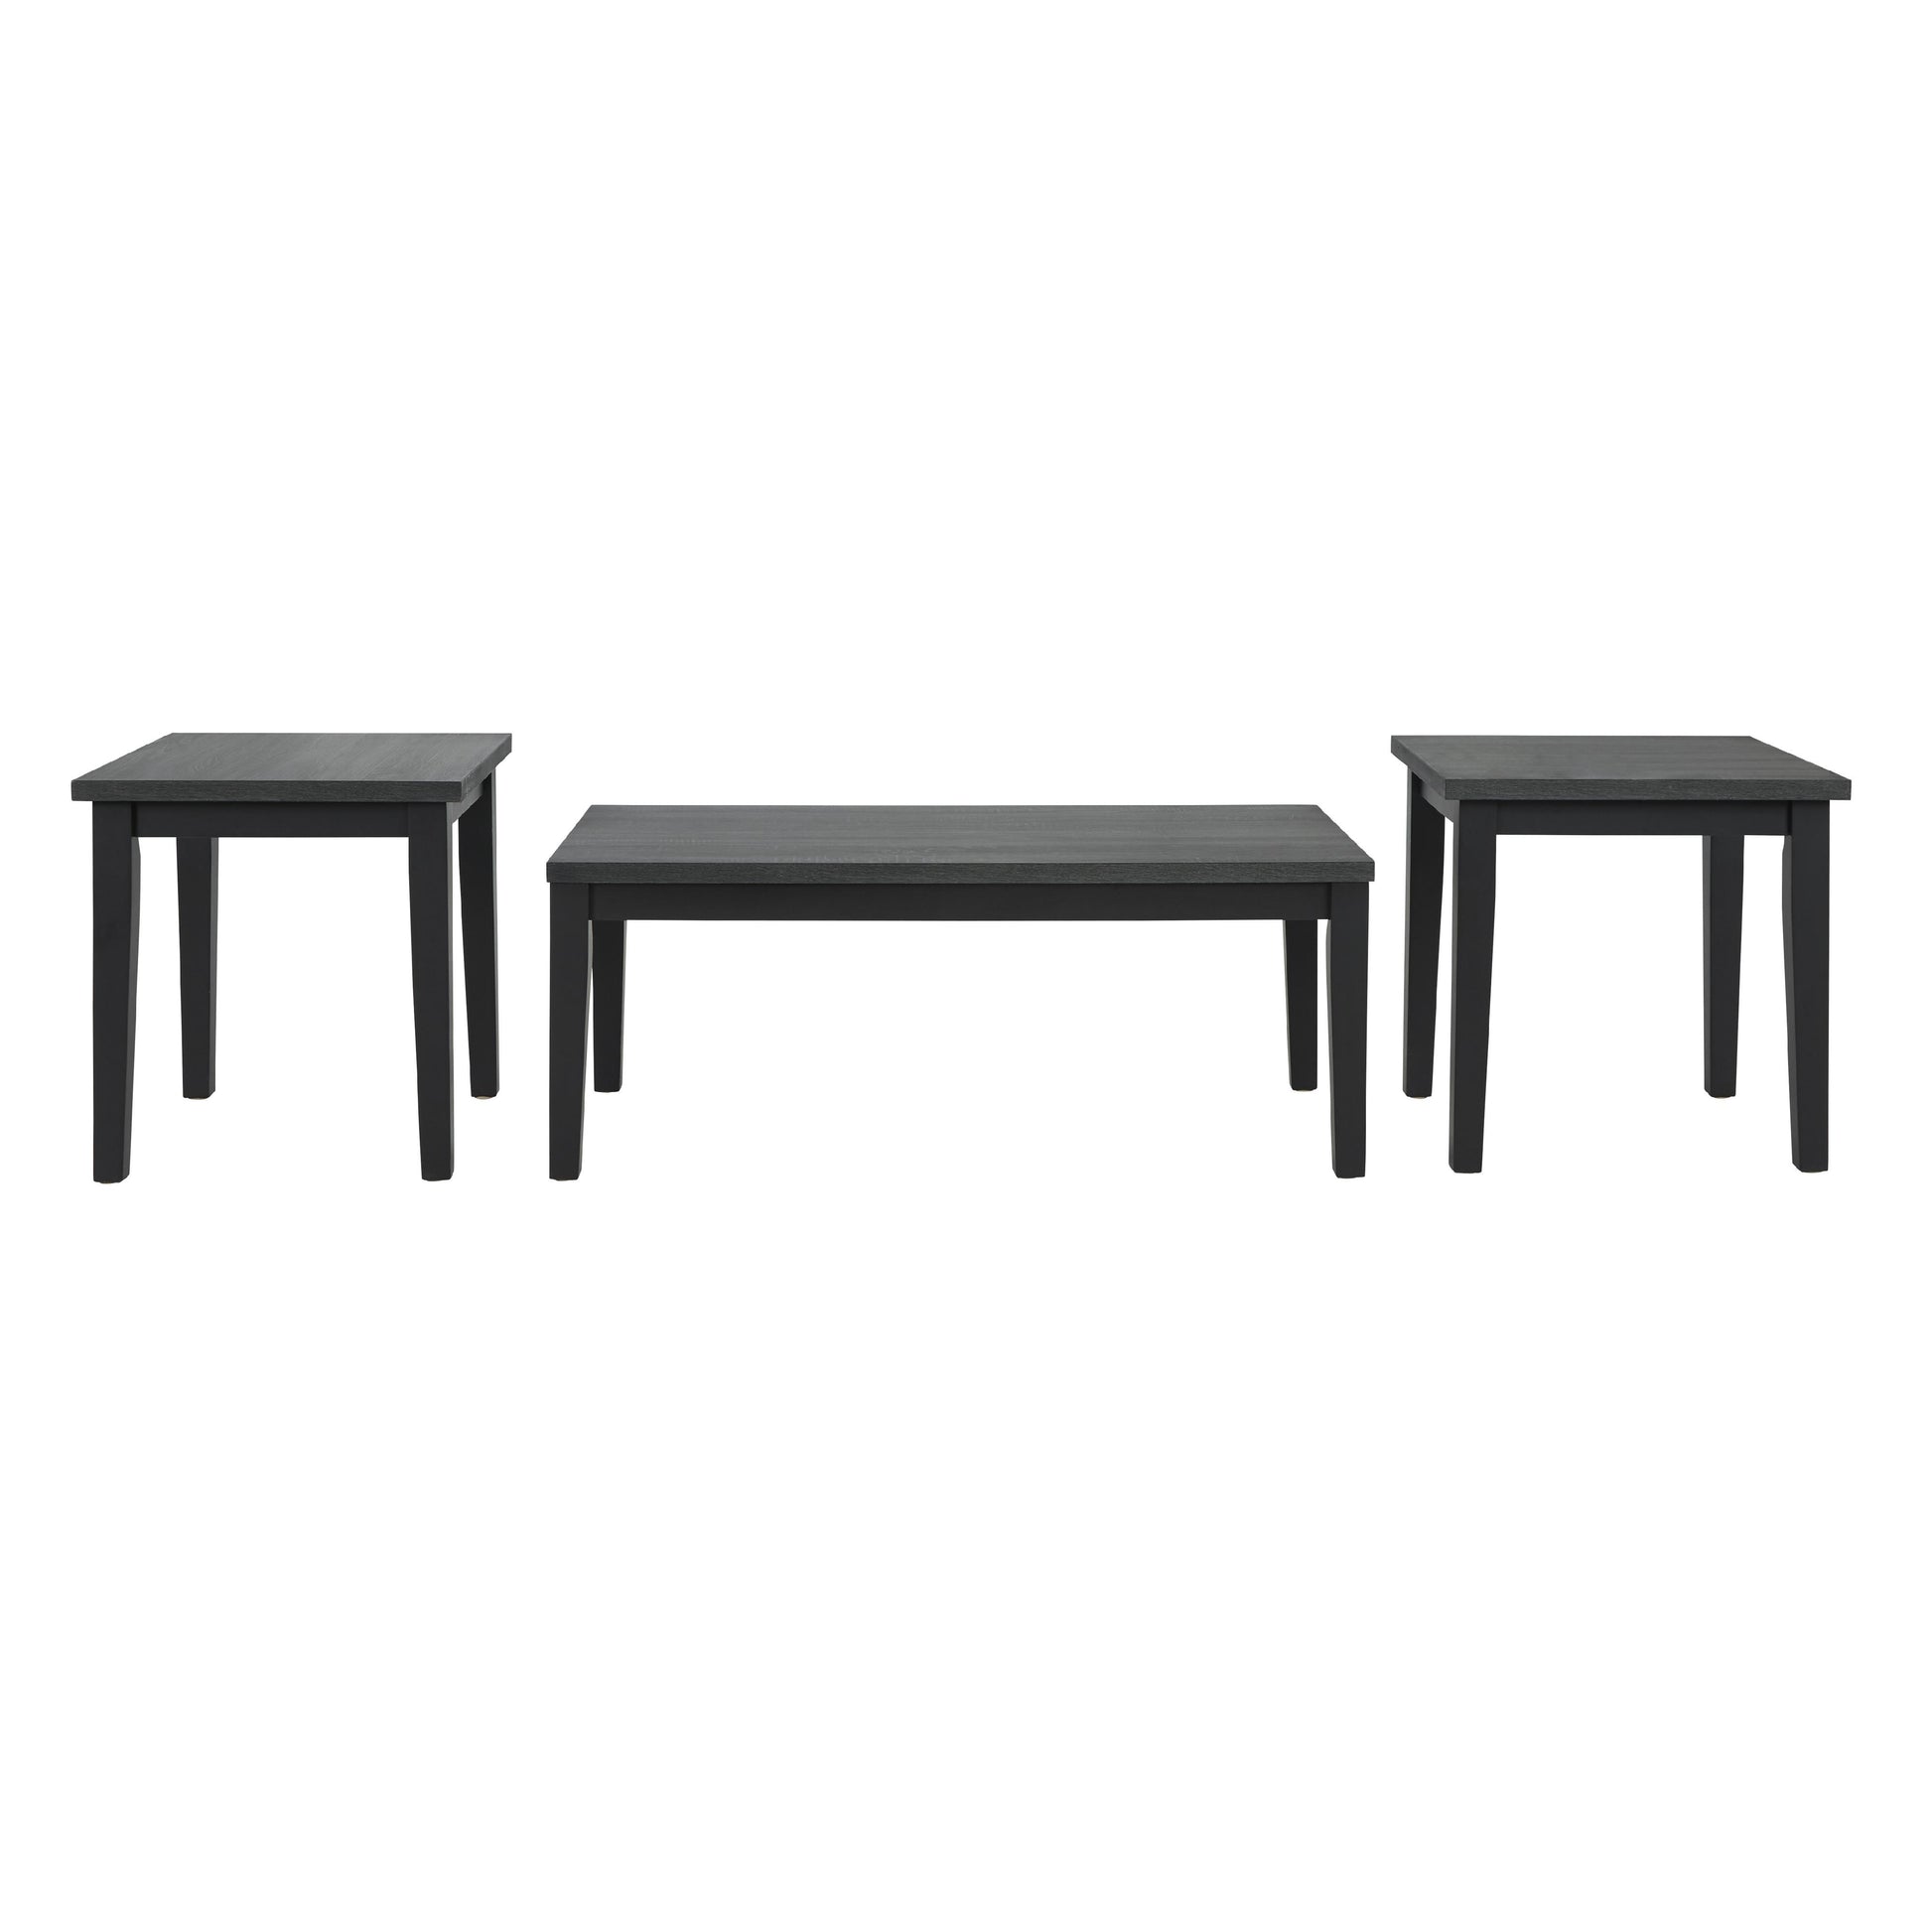 Signature Design by Ashley Garvine Occasional Table Set T026-13 IMAGE 2